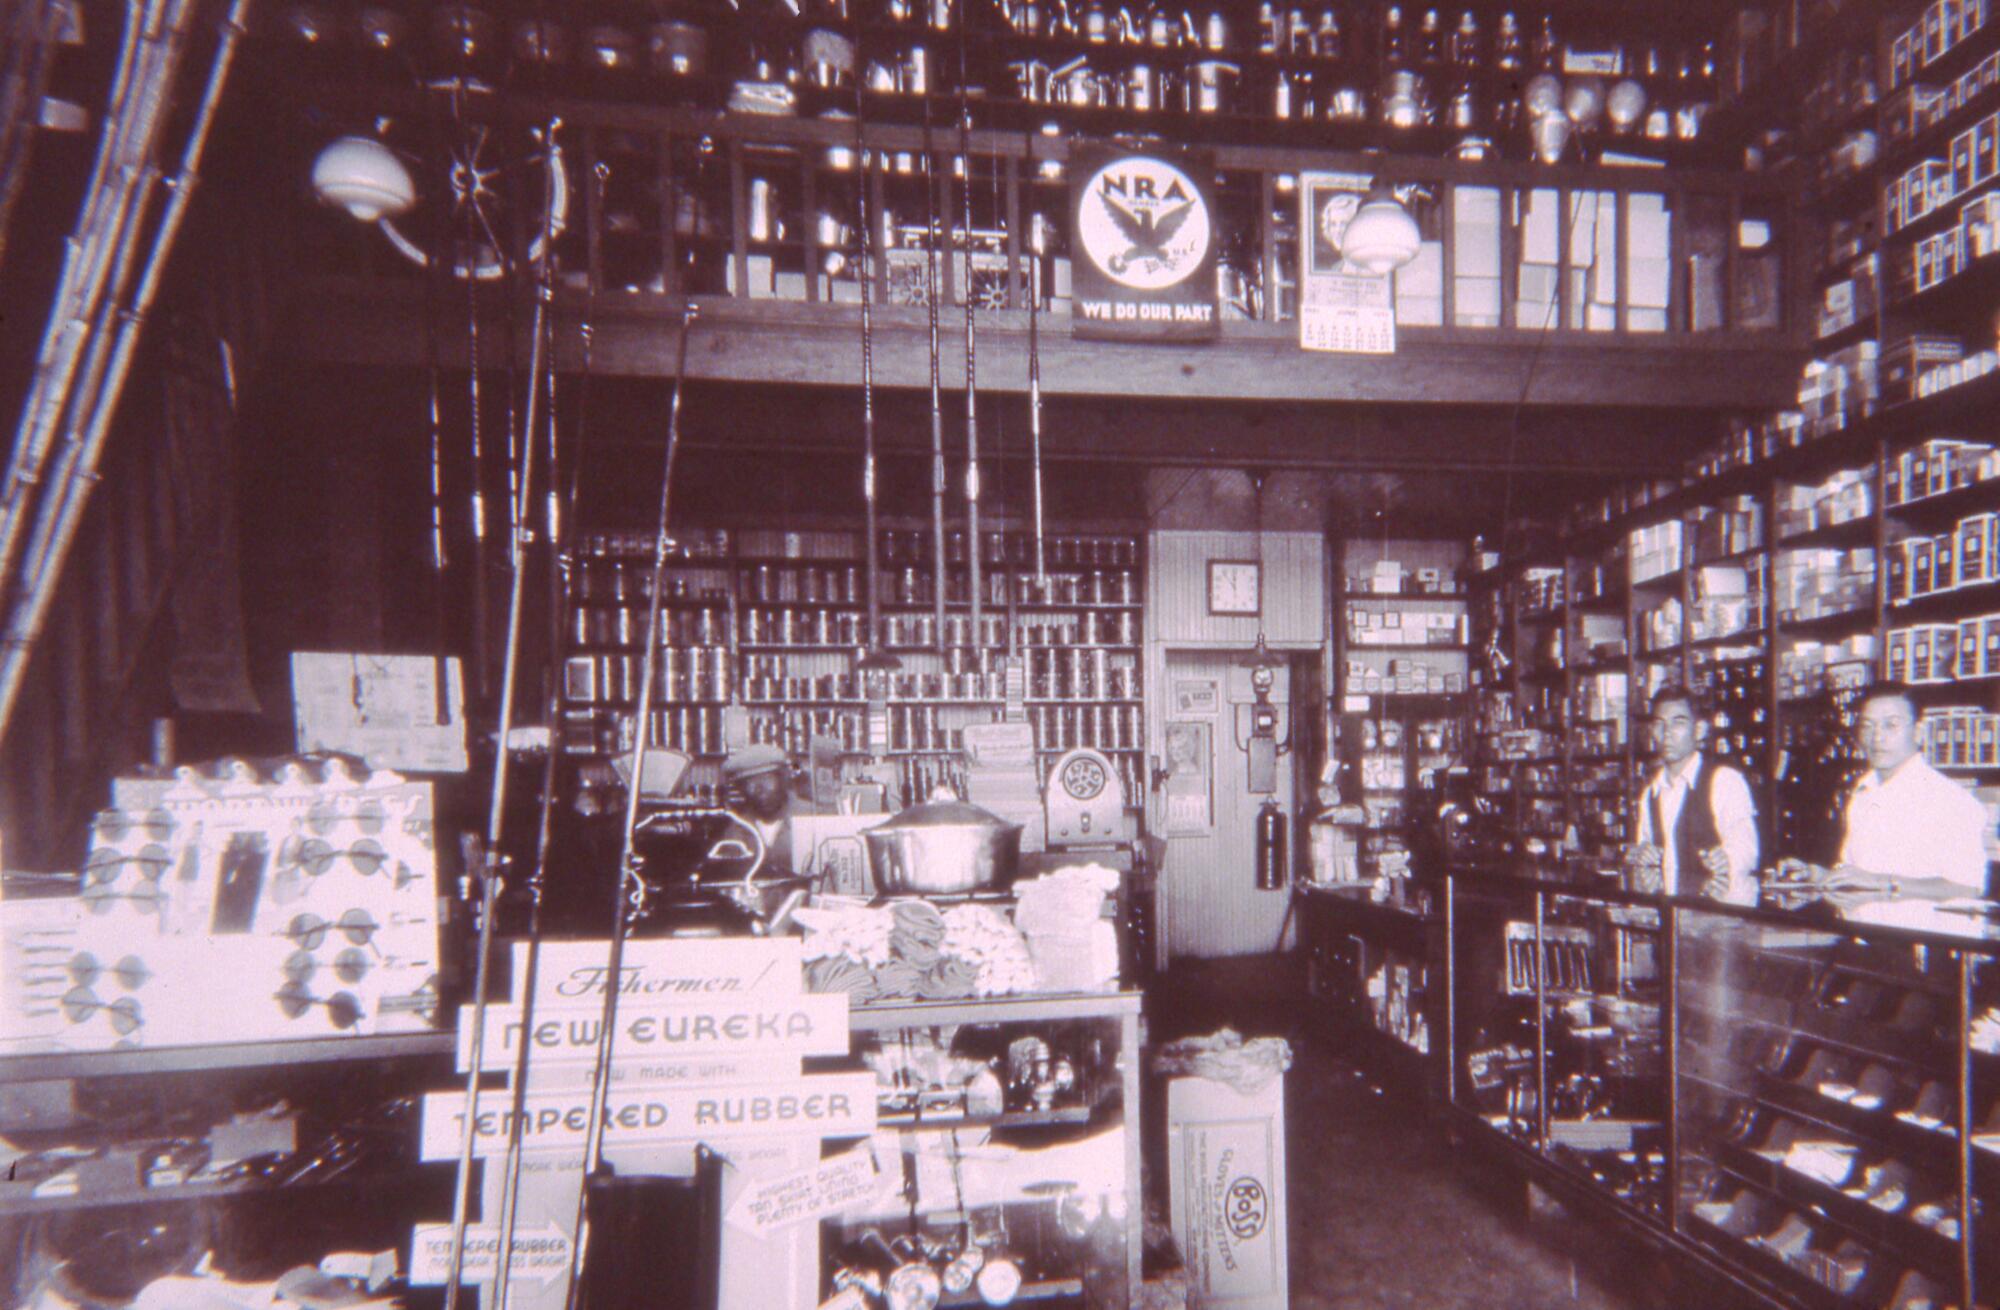 A vintage photo shows two men standing behind the counter of a store, its walls lined with fishing poles and other goods. 